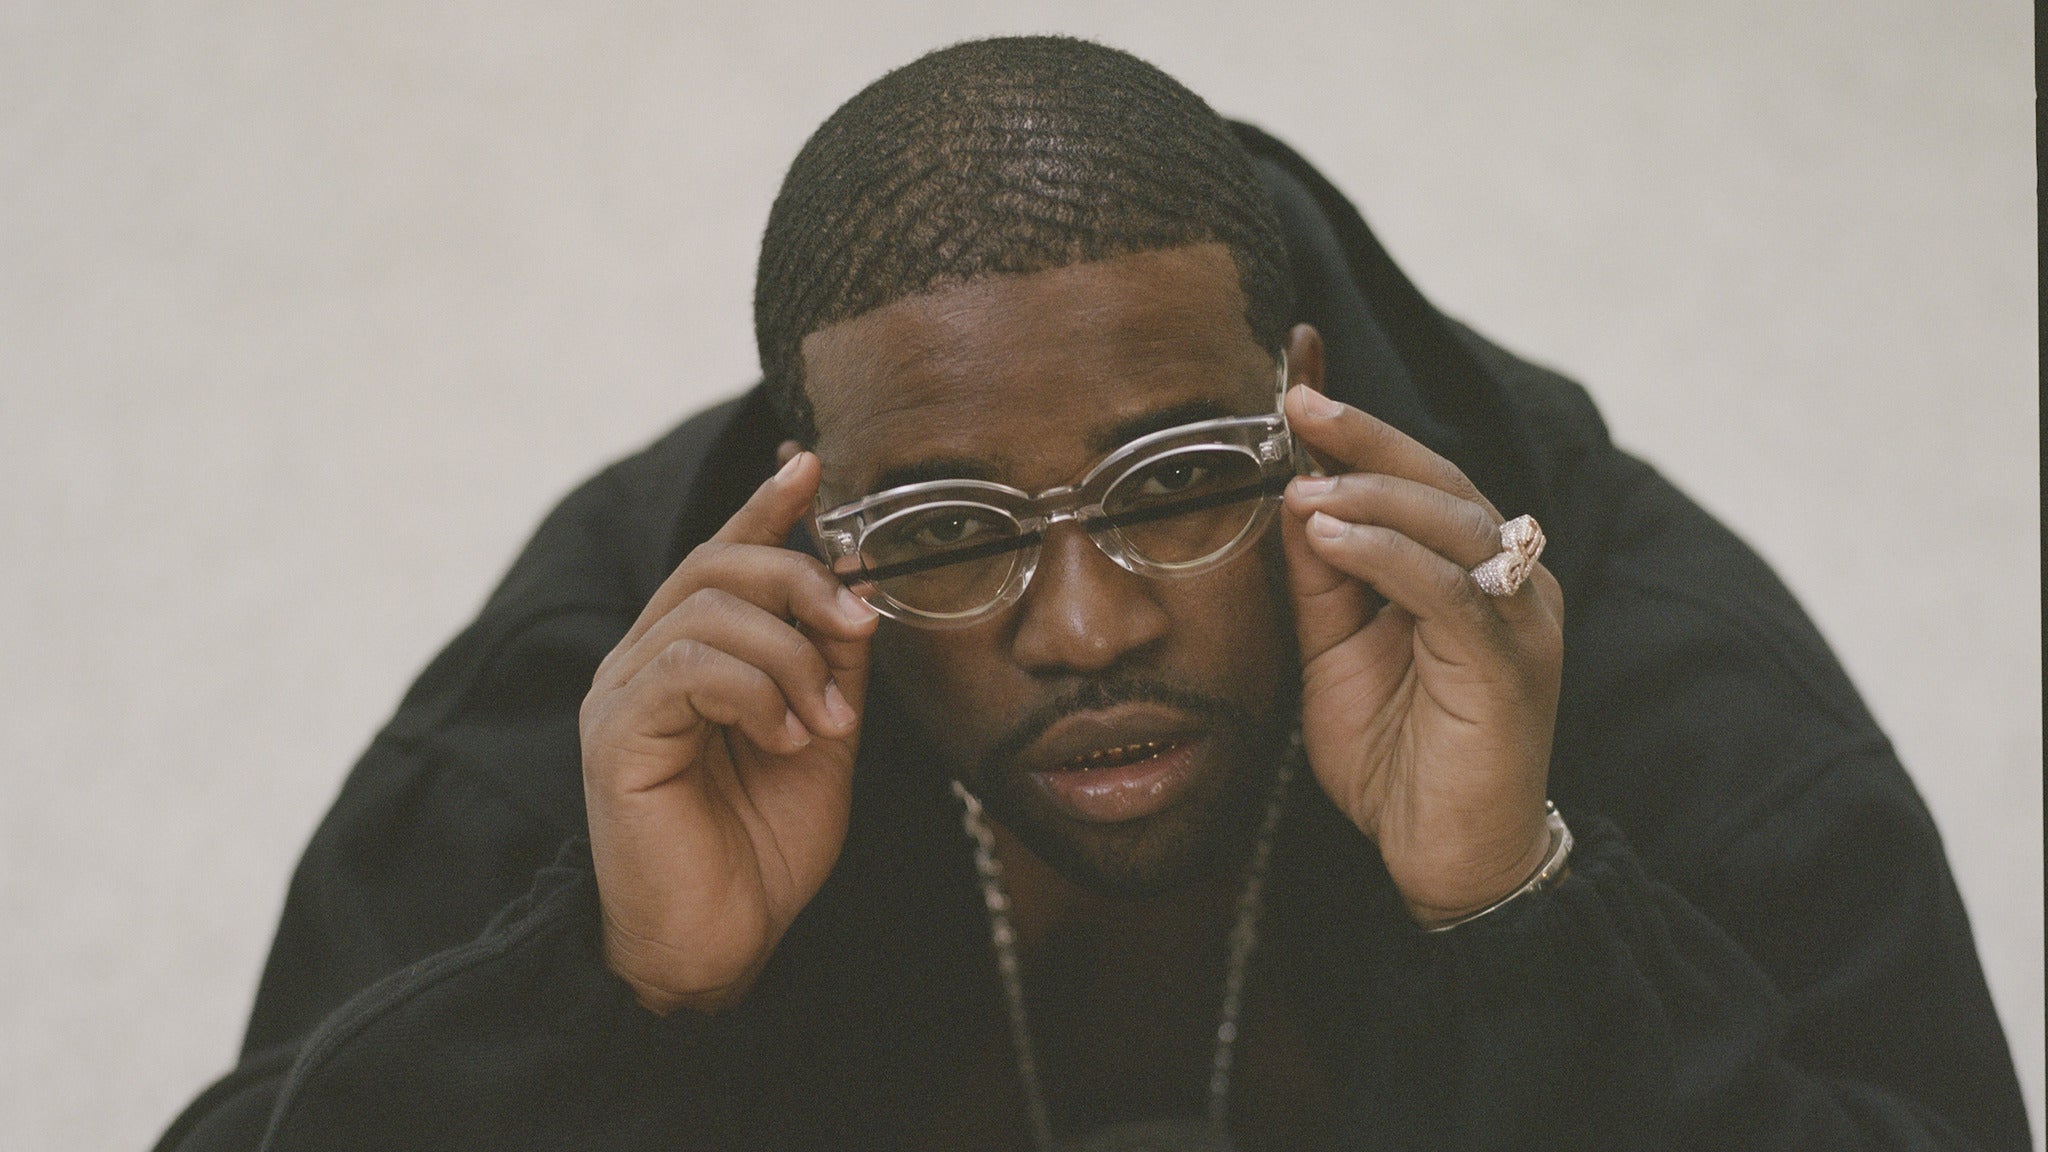 FERG presents Mad Man Tour in Indianapolis promo photo for Live Nation Mobile App presale offer code